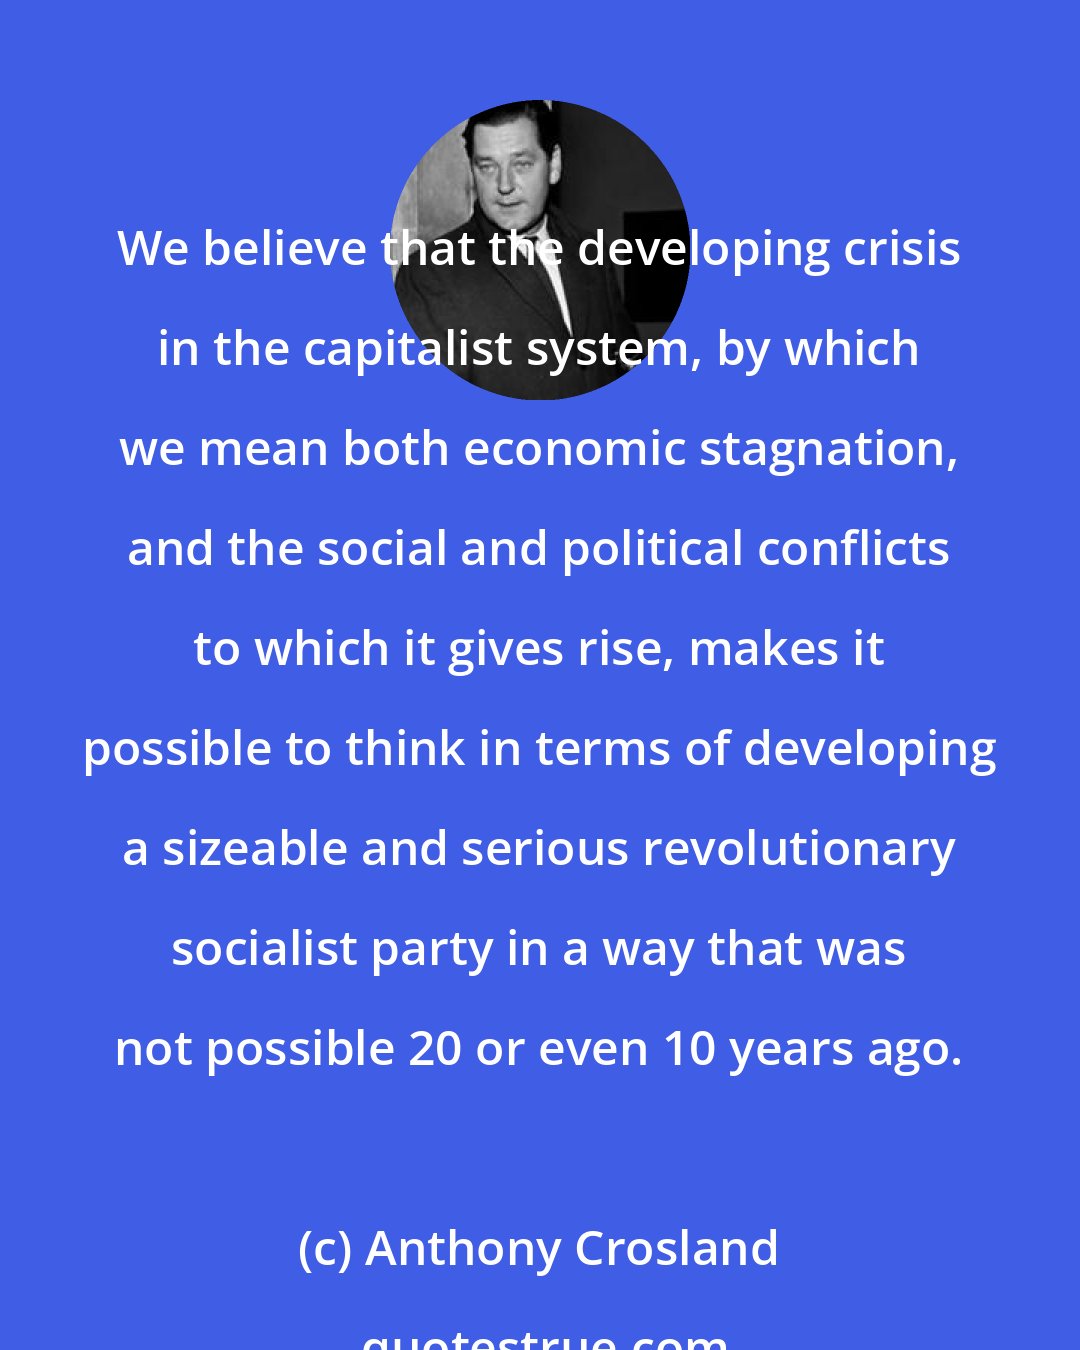 Anthony Crosland: We believe that the developing crisis in the capitalist system, by which we mean both economic stagnation, and the social and political conflicts to which it gives rise, makes it possible to think in terms of developing a sizeable and serious revolutionary socialist party in a way that was not possible 20 or even 10 years ago.